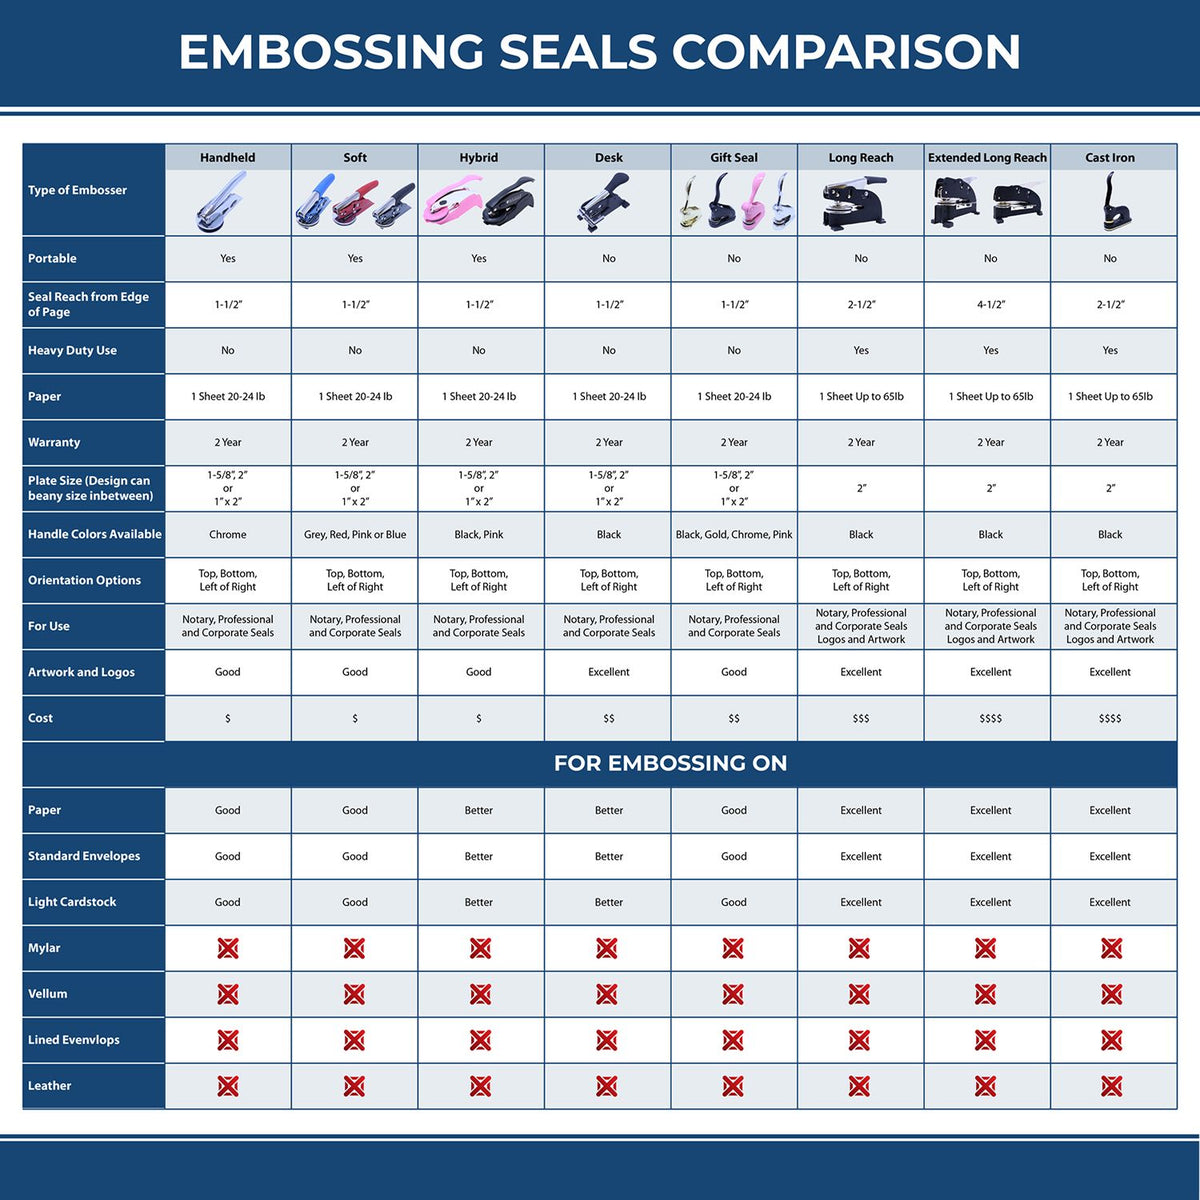 A comparison chart for the different types of mount models available for the Handheld North Carolina Professional Geologist Embosser